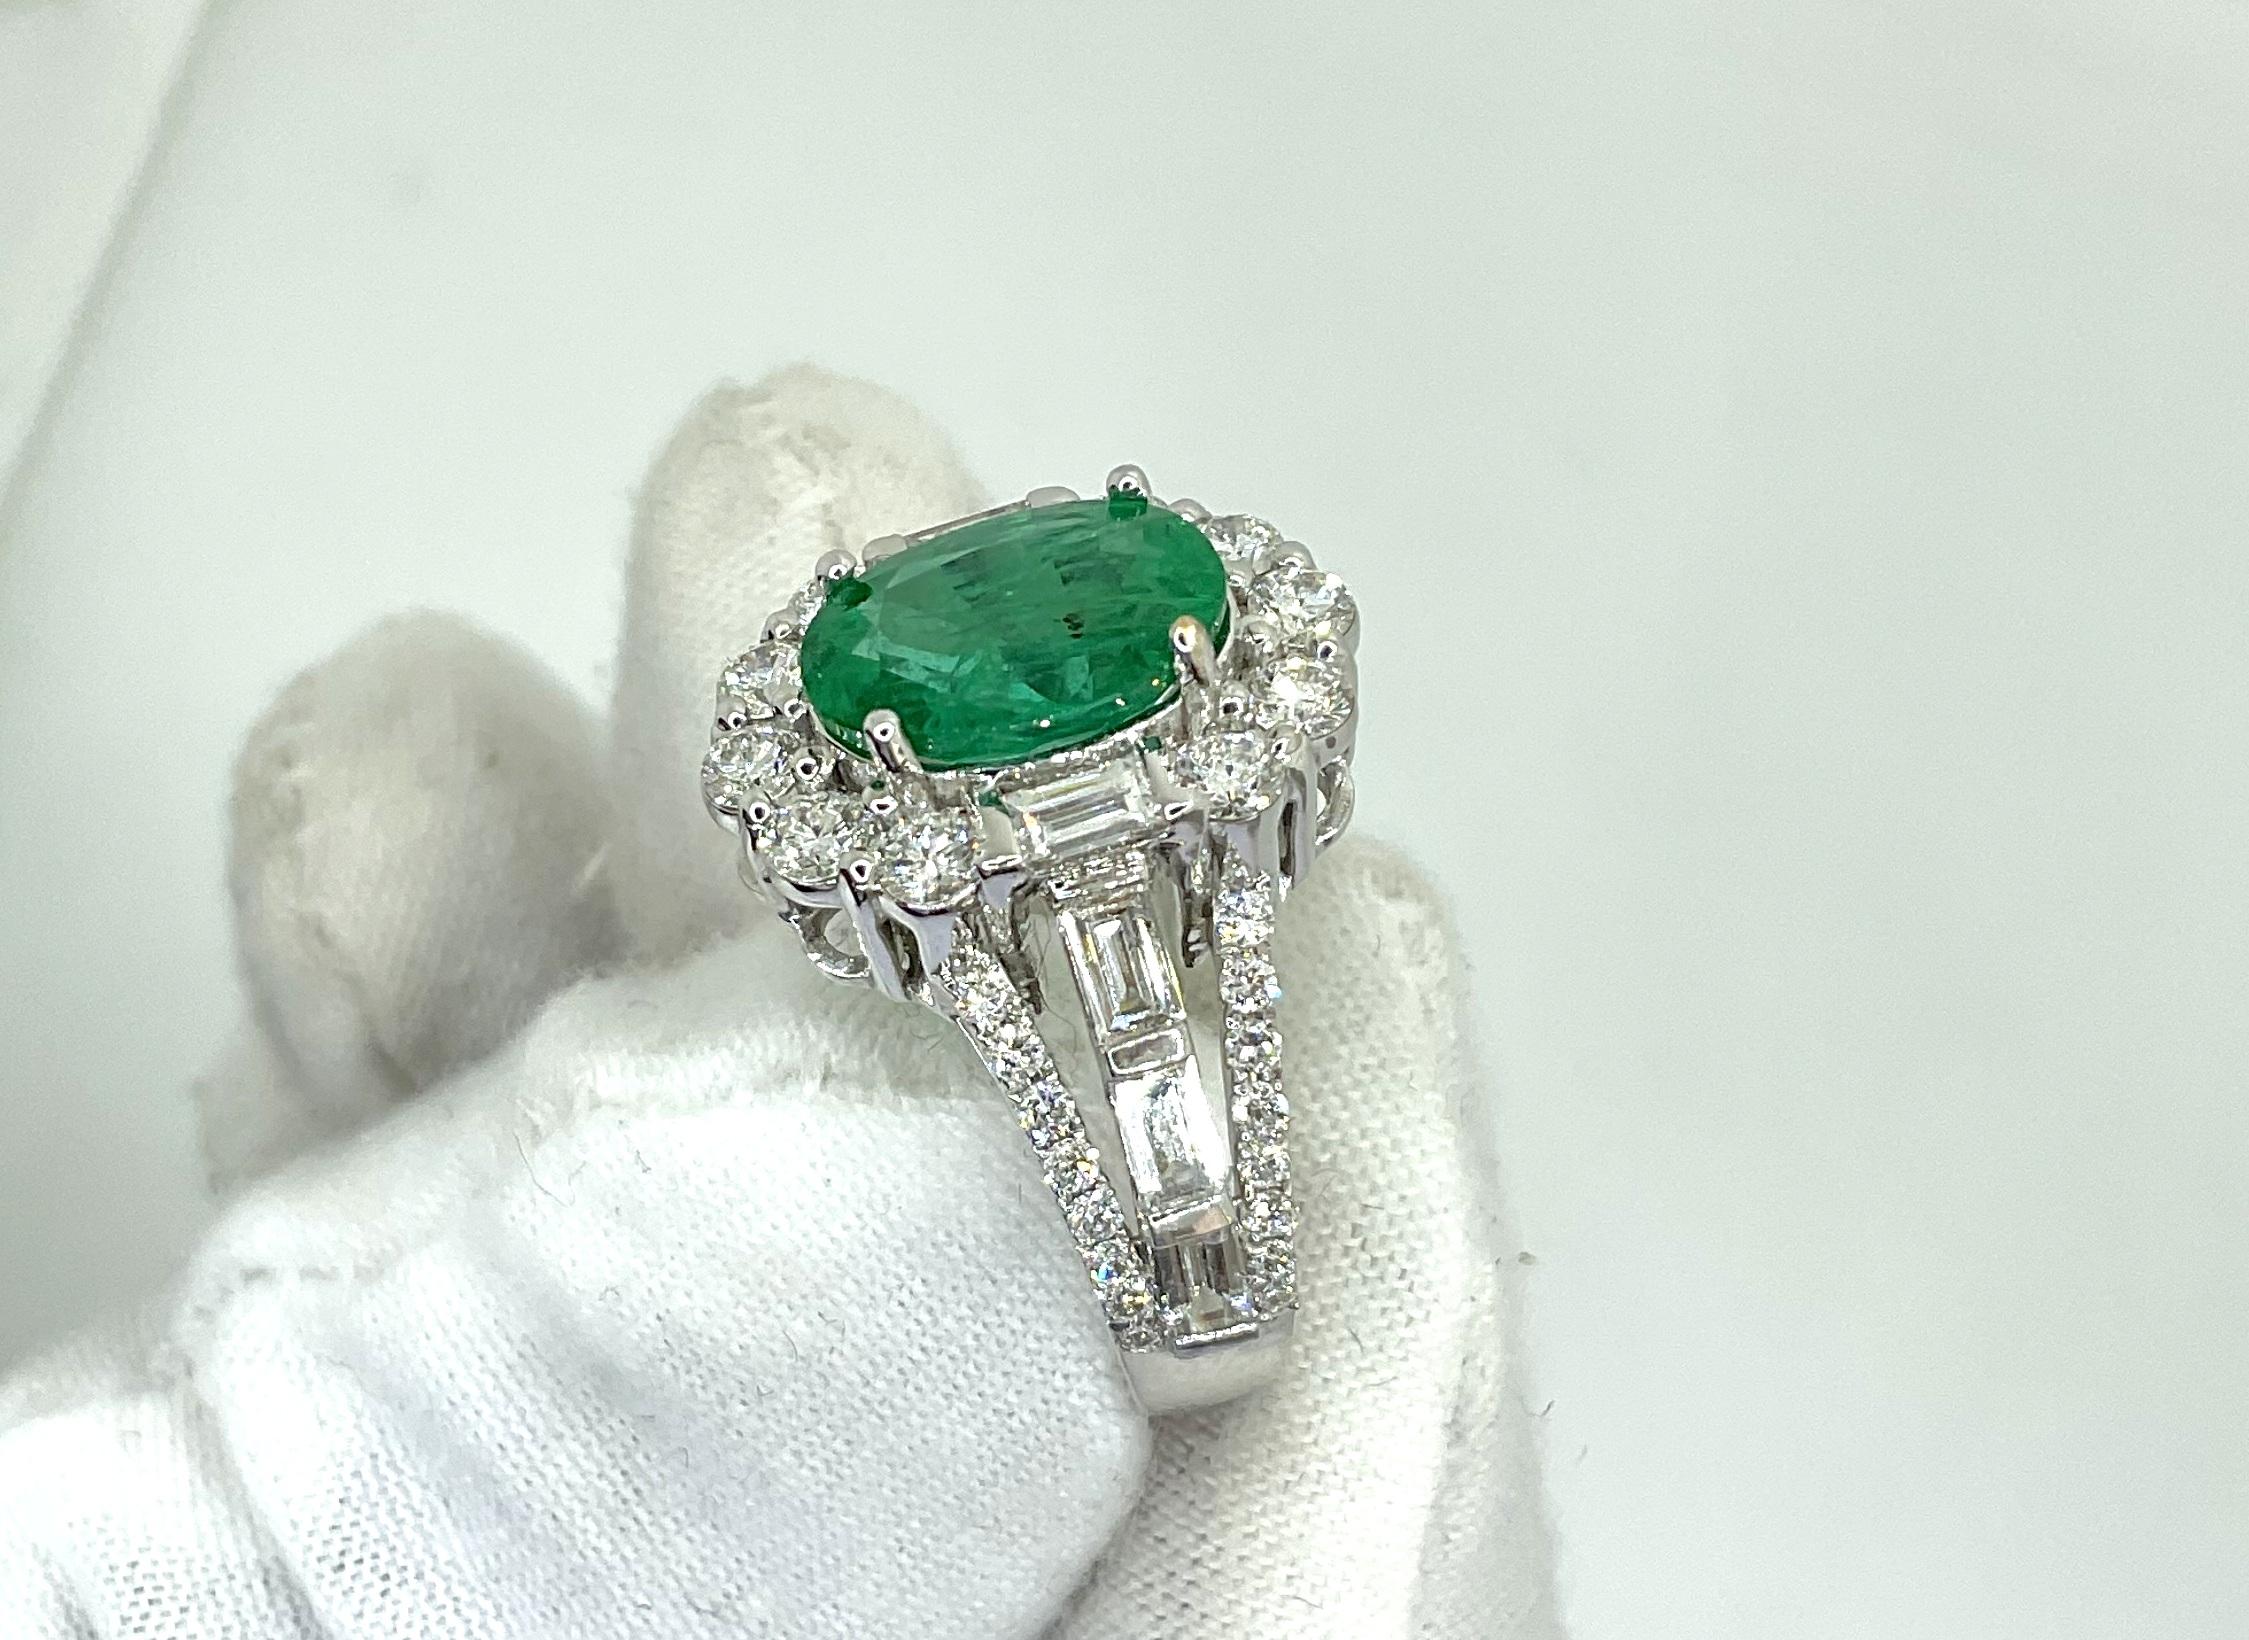 Contemporary 18k Gold Art Deco Zambian Emerald Cocktail Ring 2.05 cts with 1.49 ct Diamonds  For Sale